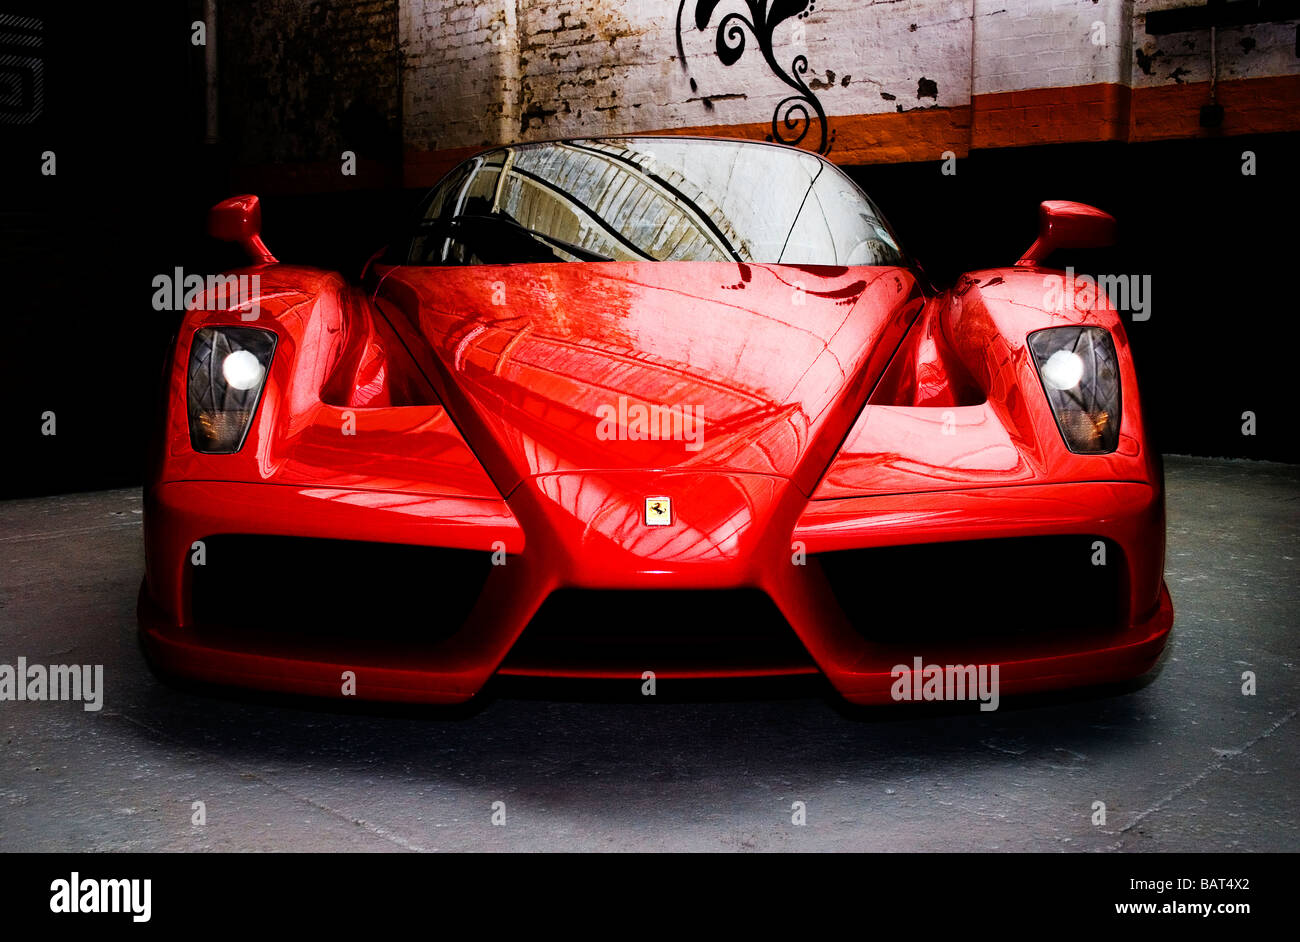 Front end view of a red Ferrari Enzo bonnet or hood indoors in garage Stock Photo